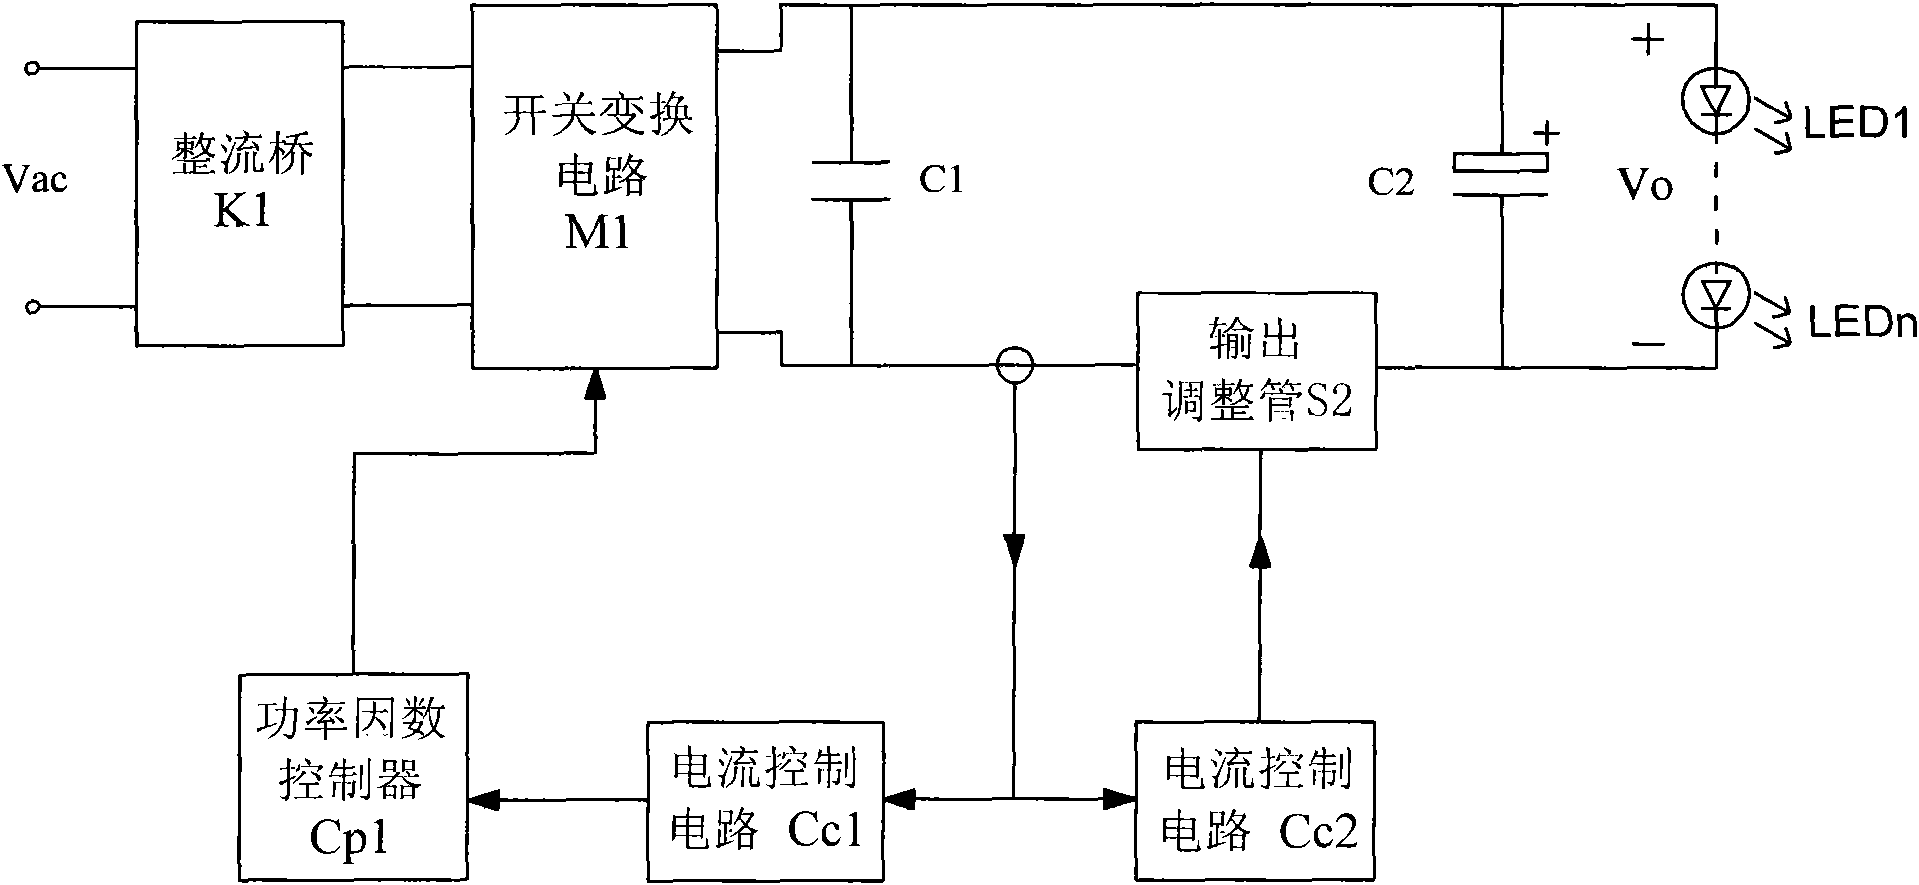 AC-DC LED drive circuit with high power factor